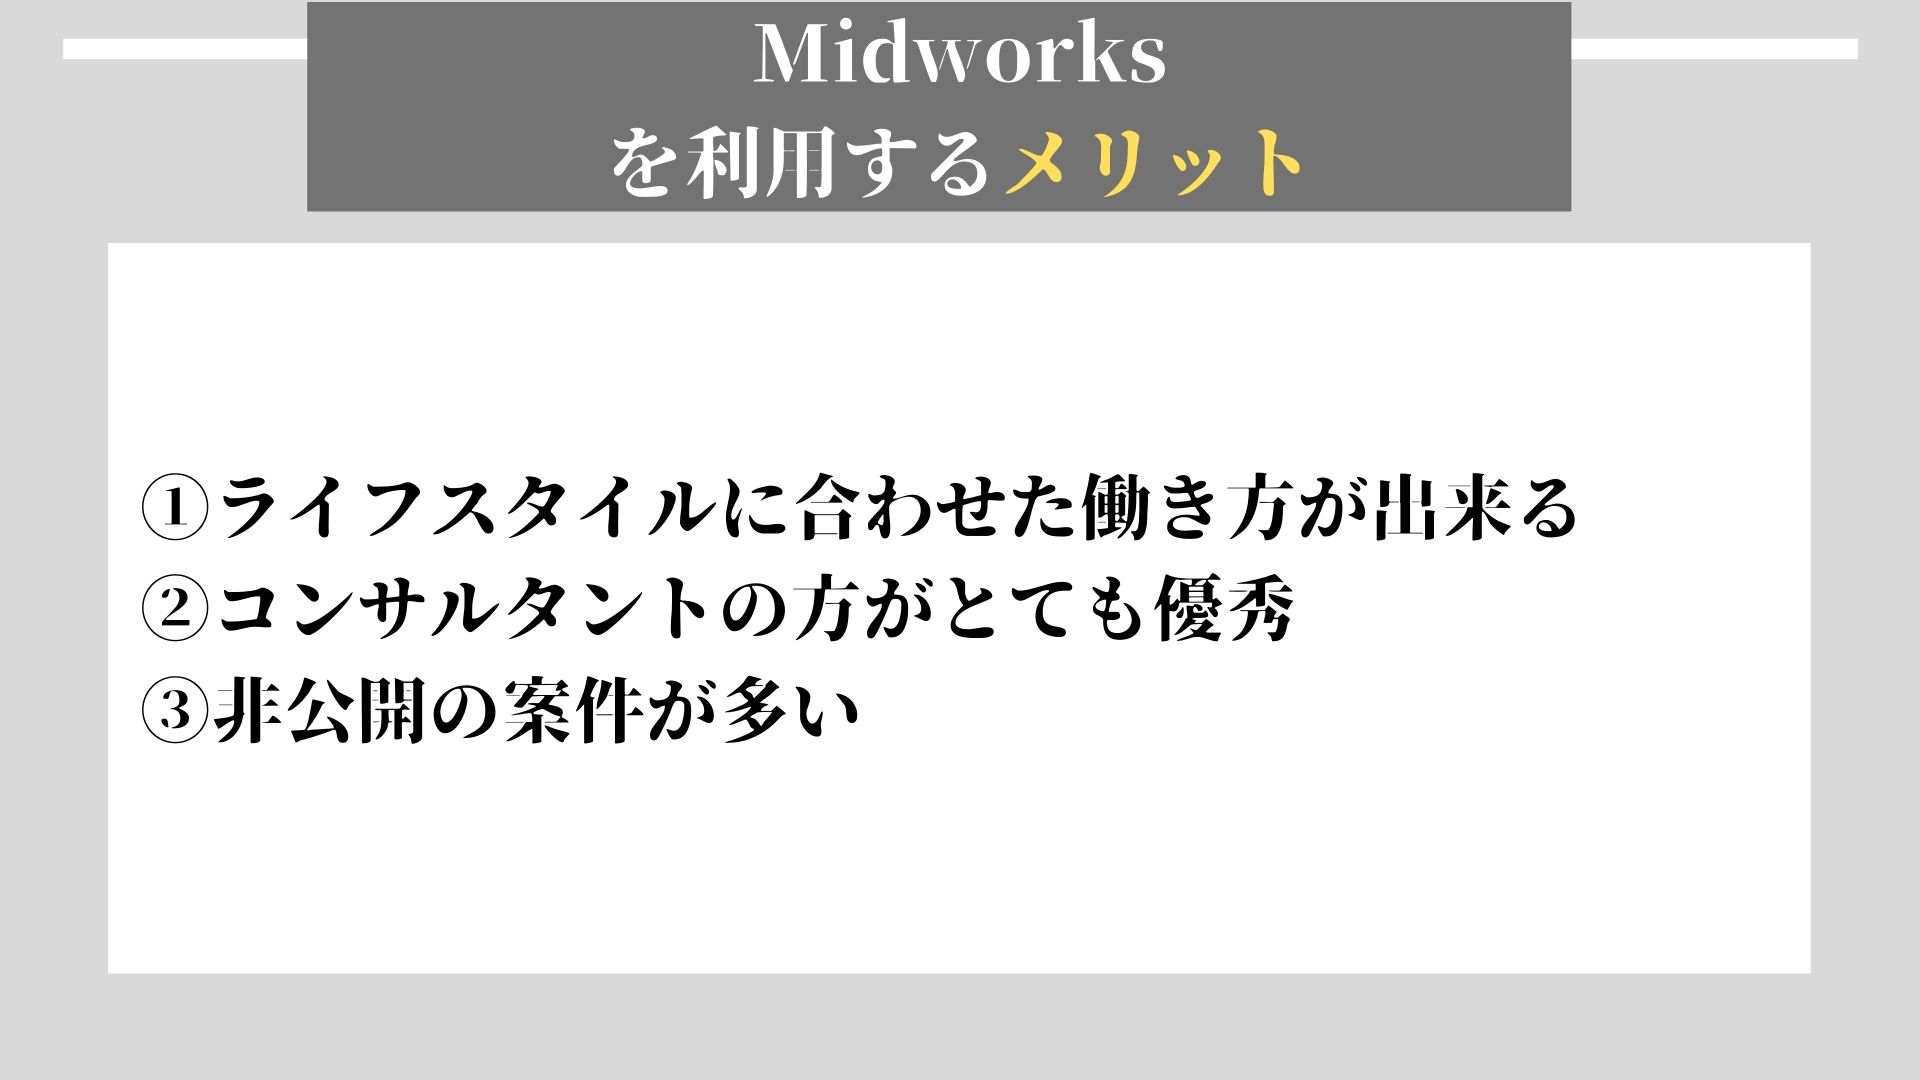 Midworks　メリット